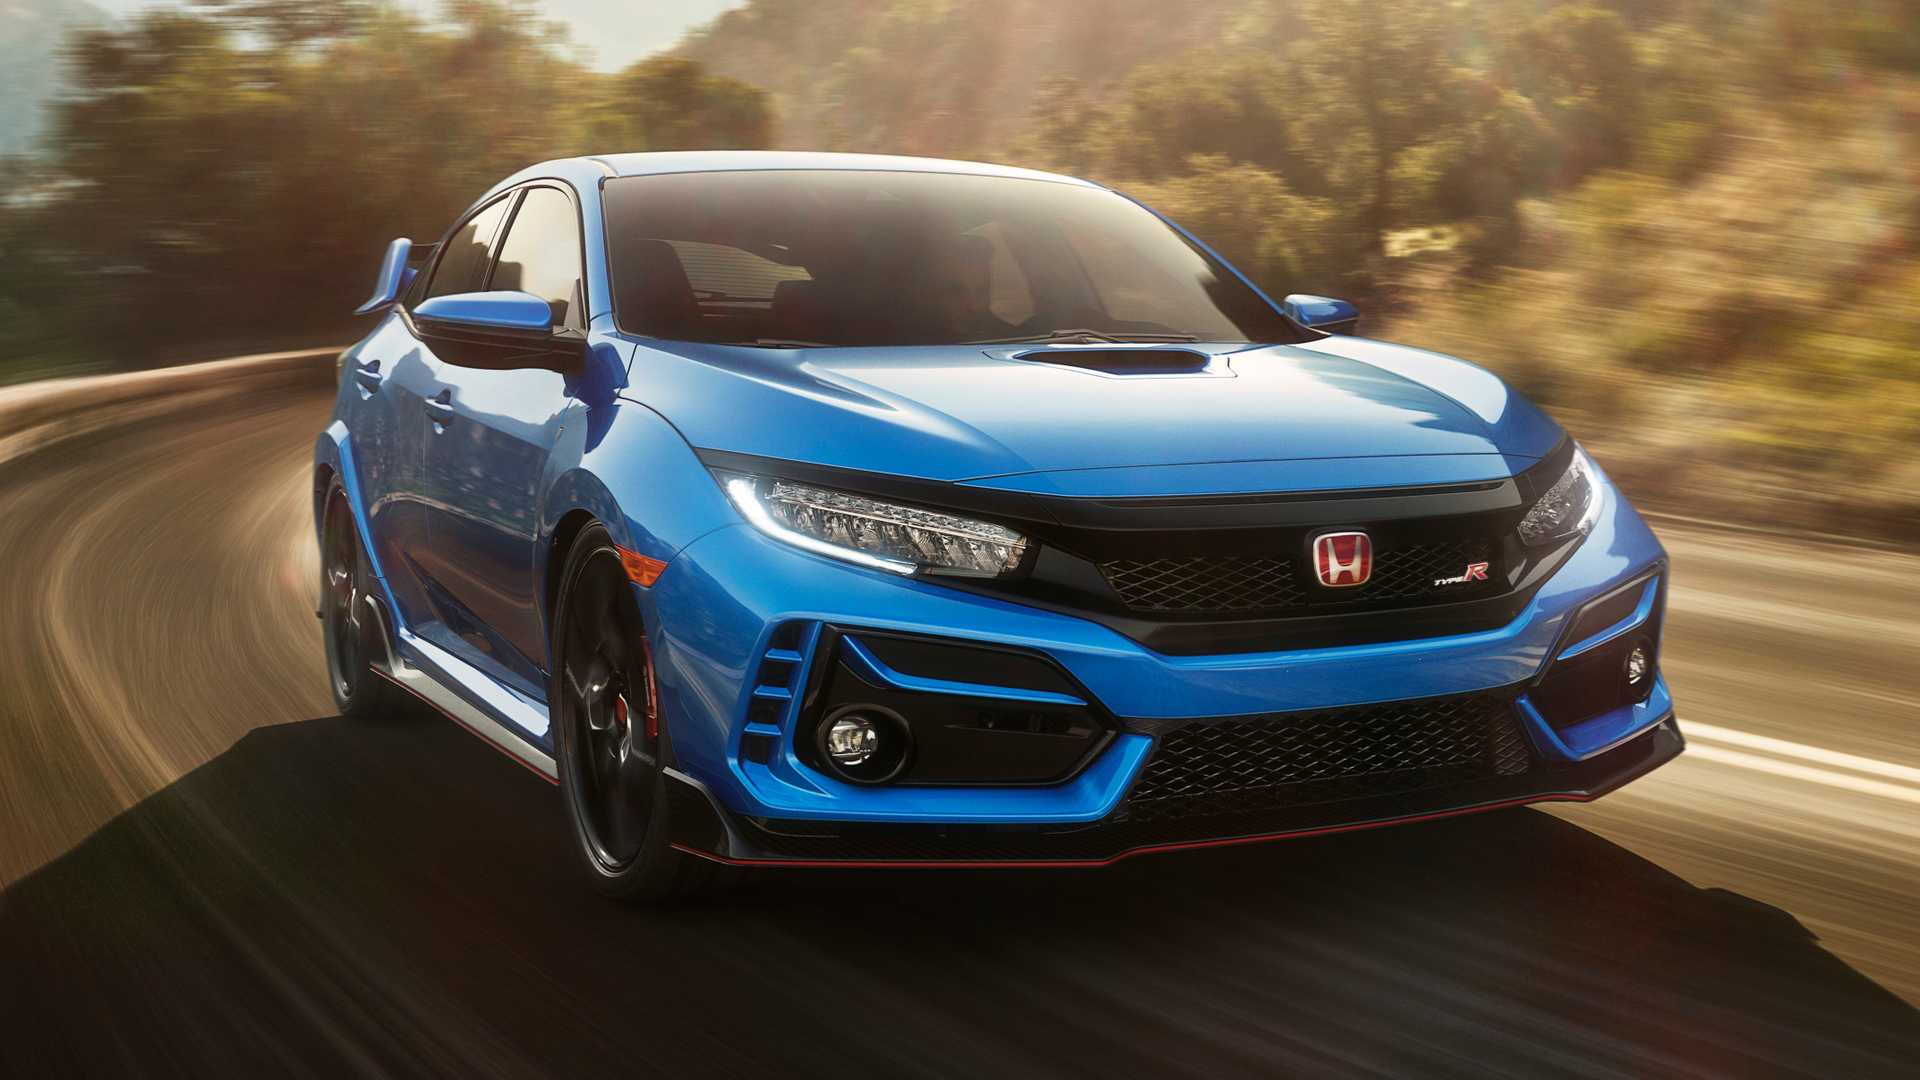 Honda Civic Type R Revealed With Visual And Hardware Changes